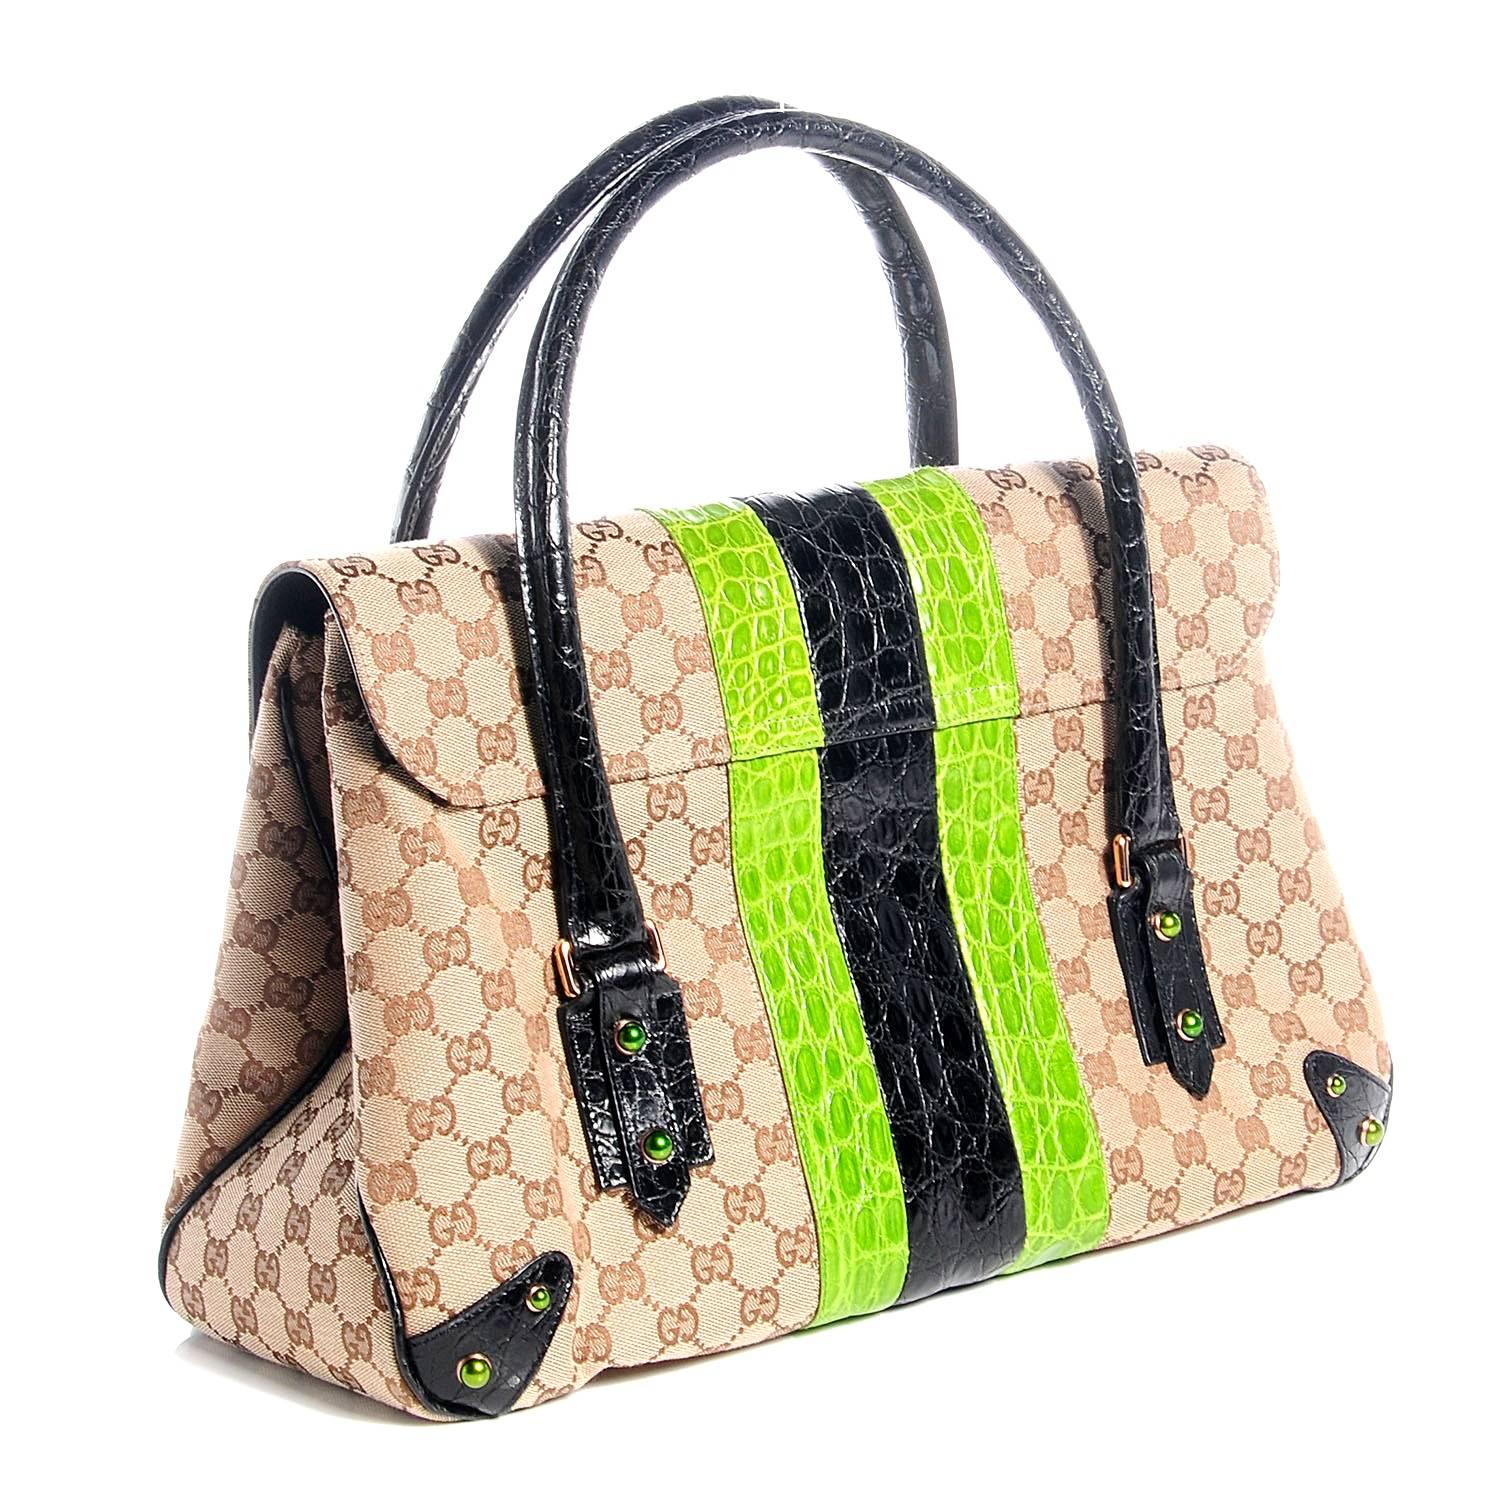 STUNNING TOM FORD CLASSIC

This gorgeous piece is crafted of brown Gucci GG monogram canvas with remarkable crocodile features - a wide central stripe of neon green and black crocodile skin, black crocodile top handles and corner plates.
The